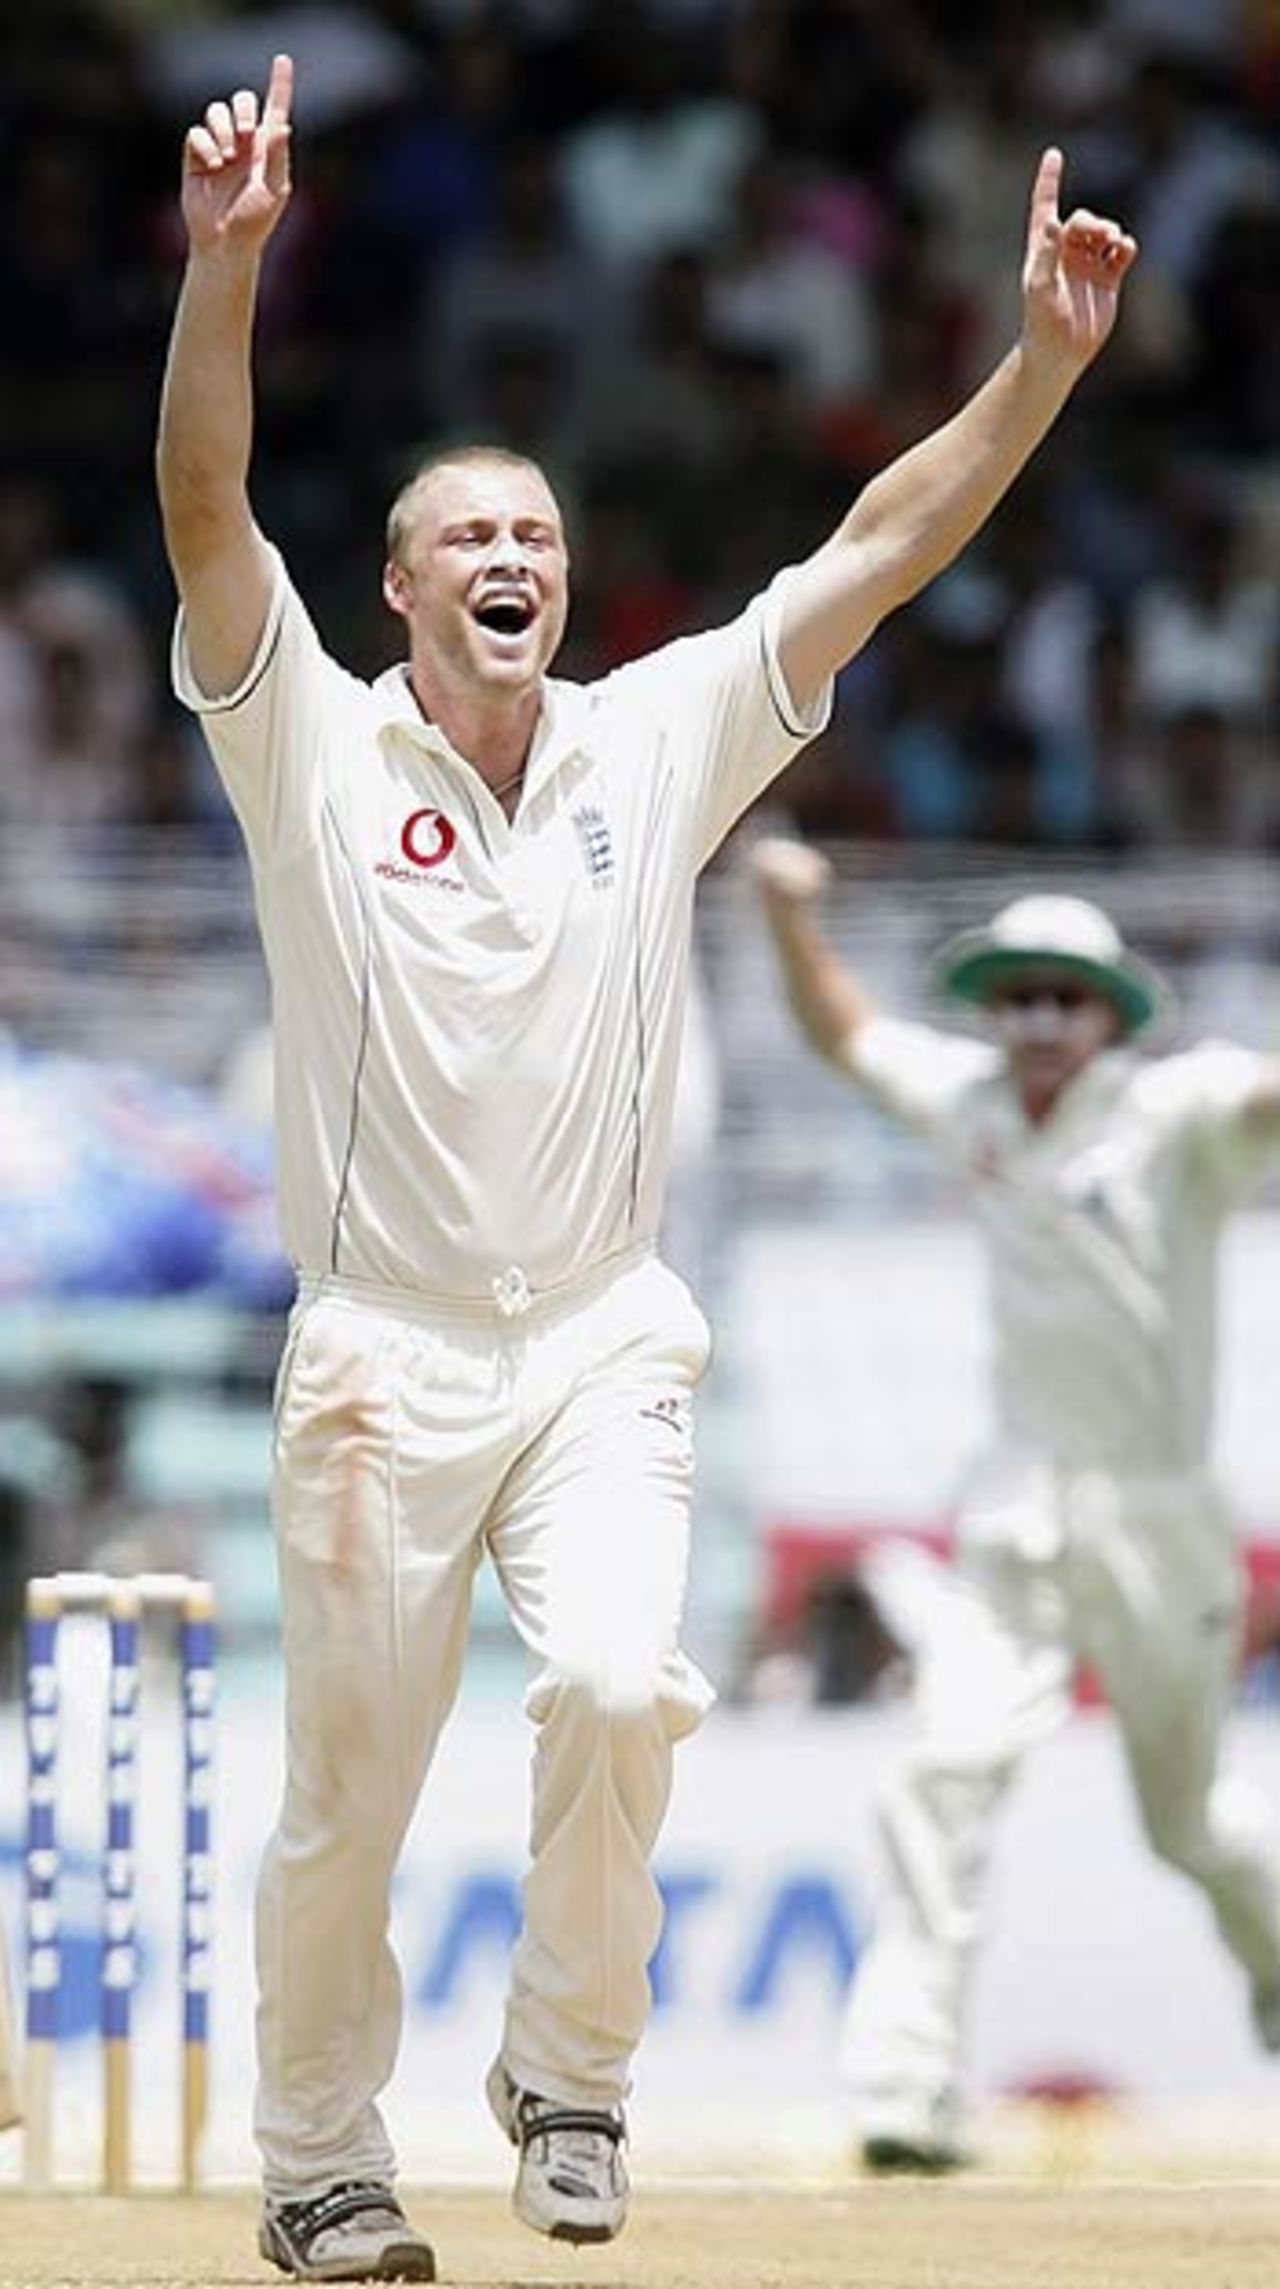 Andrew Flintoff nailed Rahul Dravid three balls after lunch, India v England, 3rd Test, Mumbai, March 22, 2006